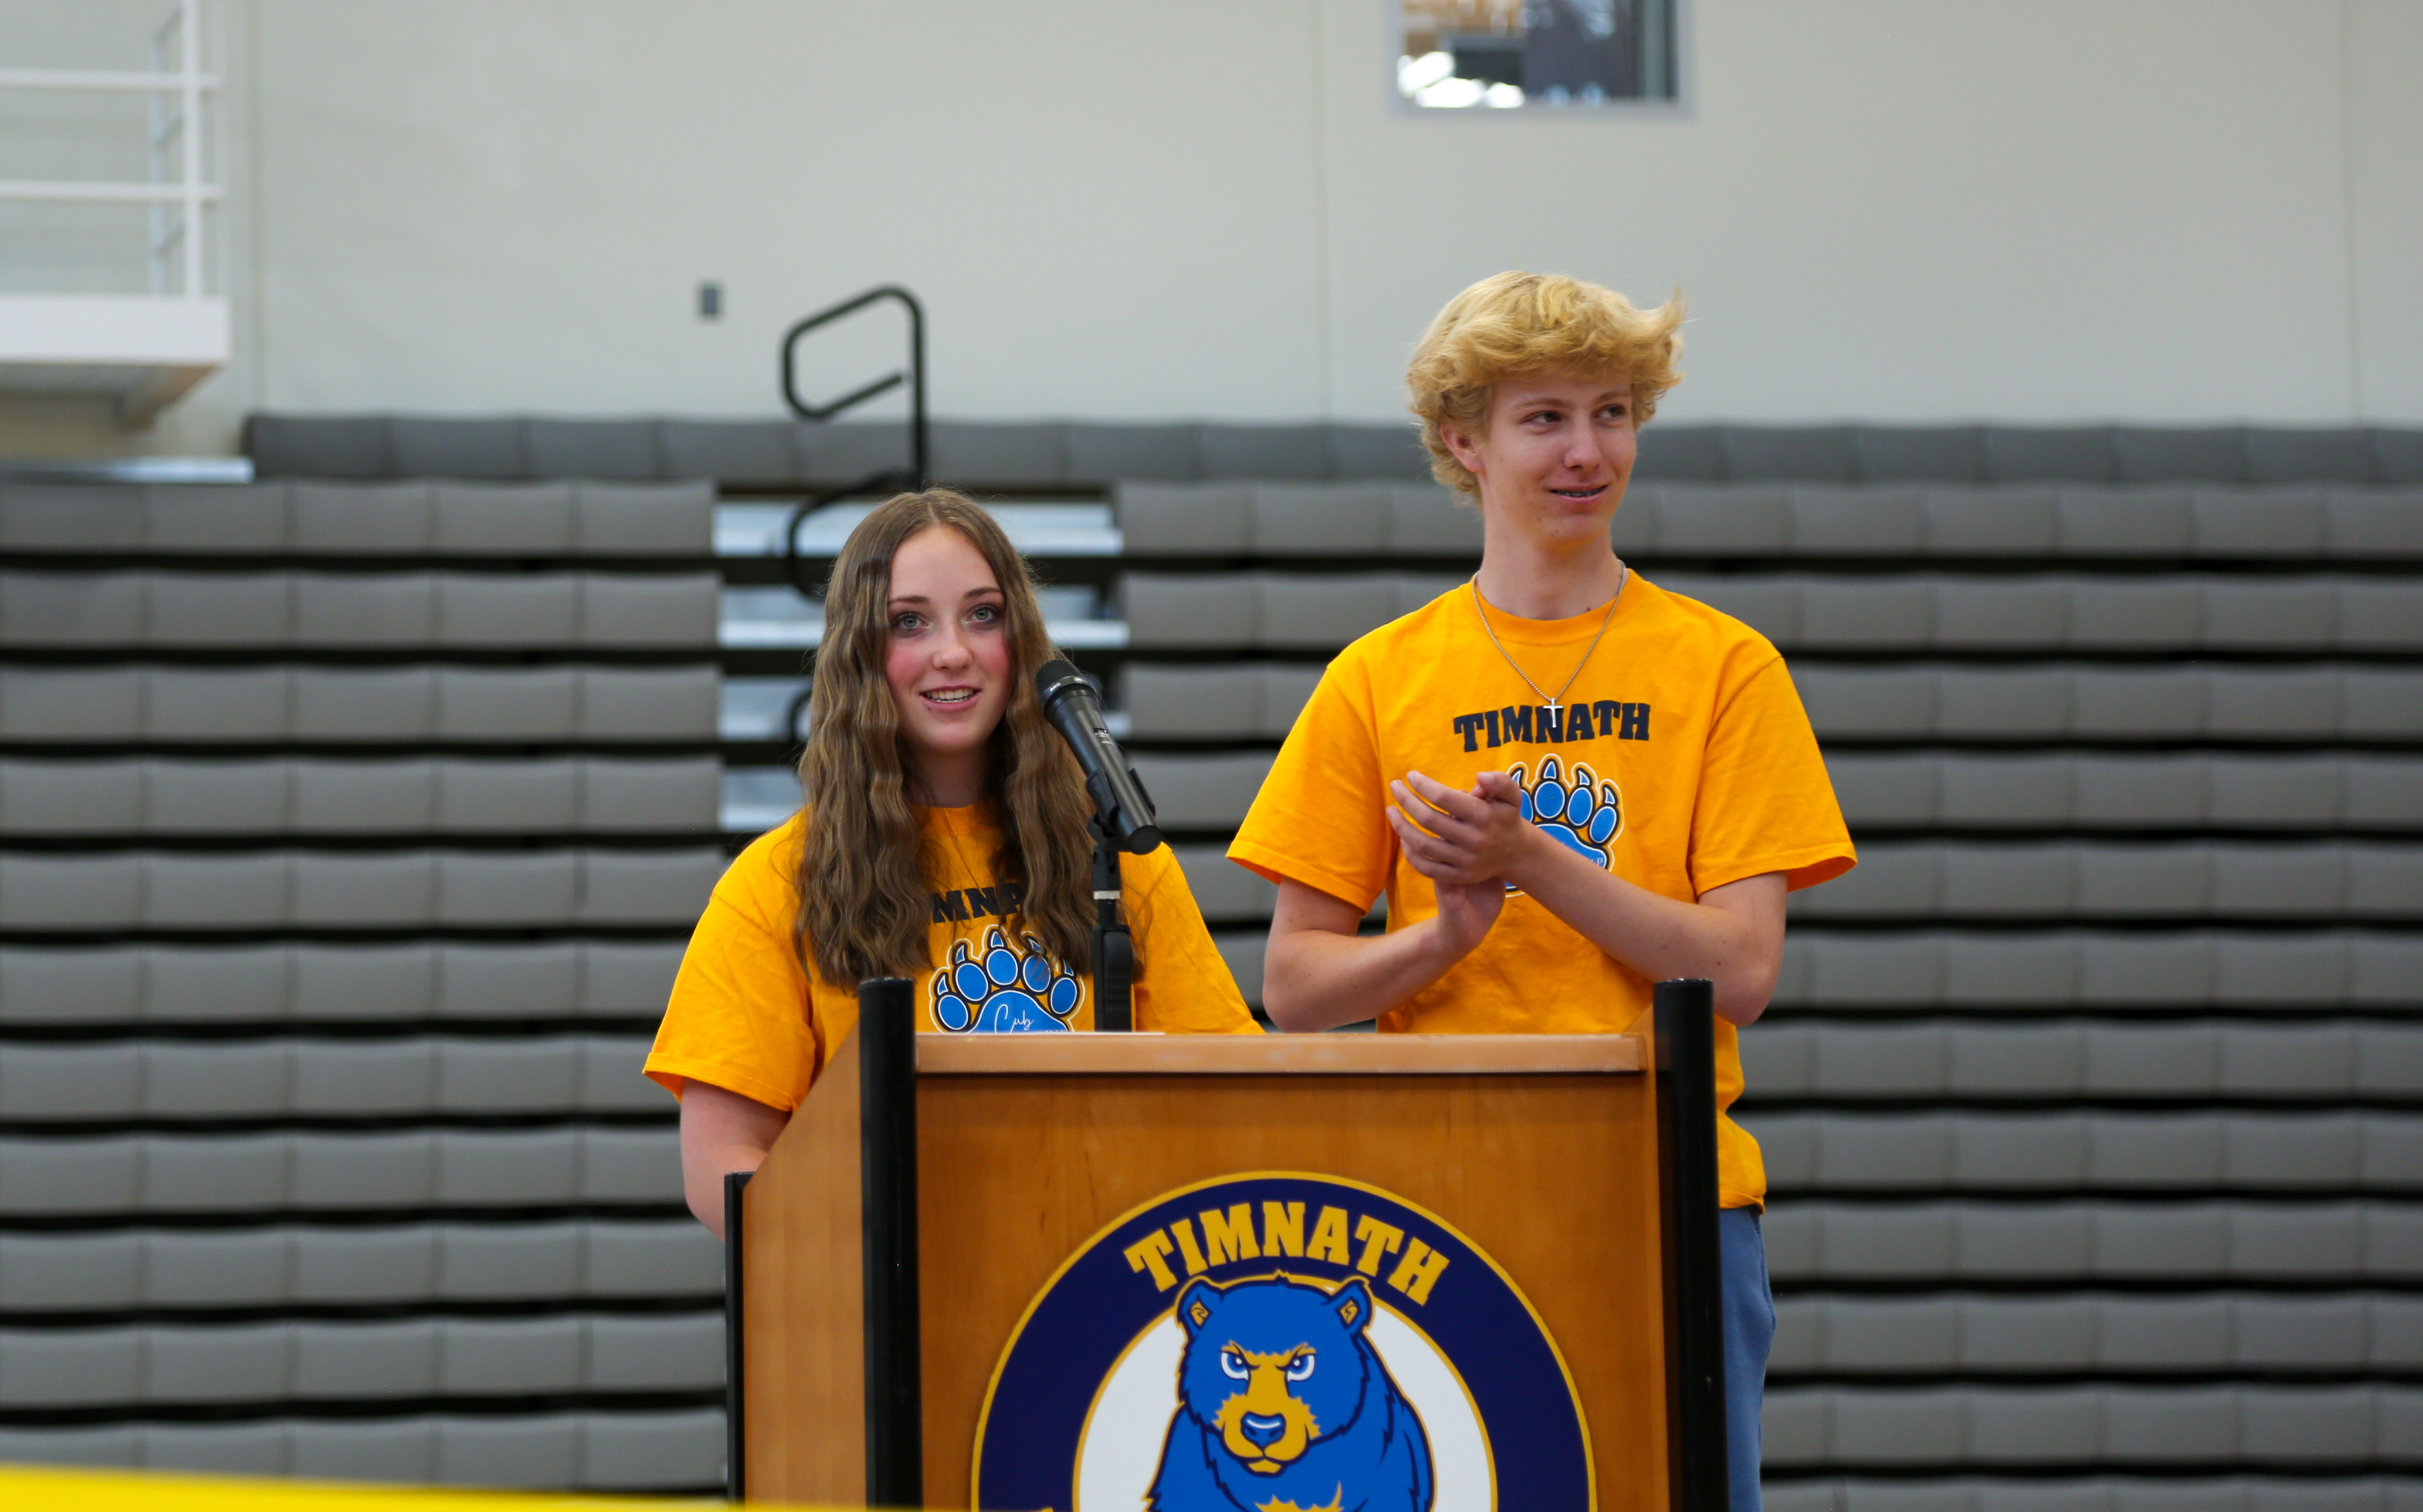 TMHS student leaders Mia Robinson and Julian Miraville speak at the school's grand opening event.